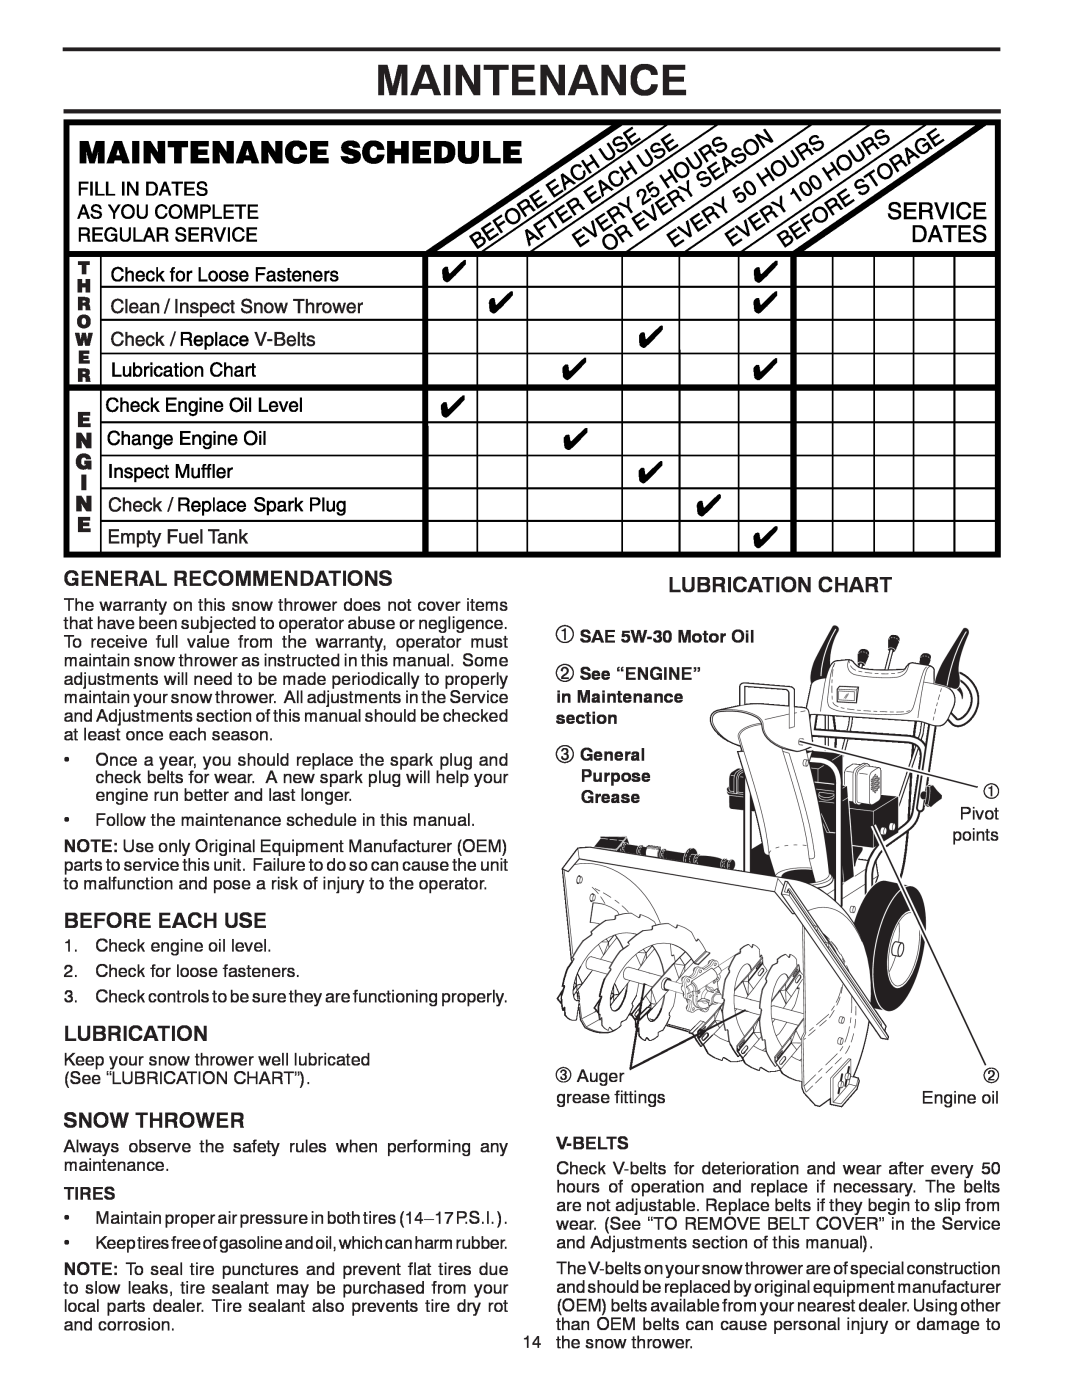 Poulan PP1150E30 Maintenance, General Recommendations, Before Each Use, Snow Thrower, Lubrication Chart, Tires 